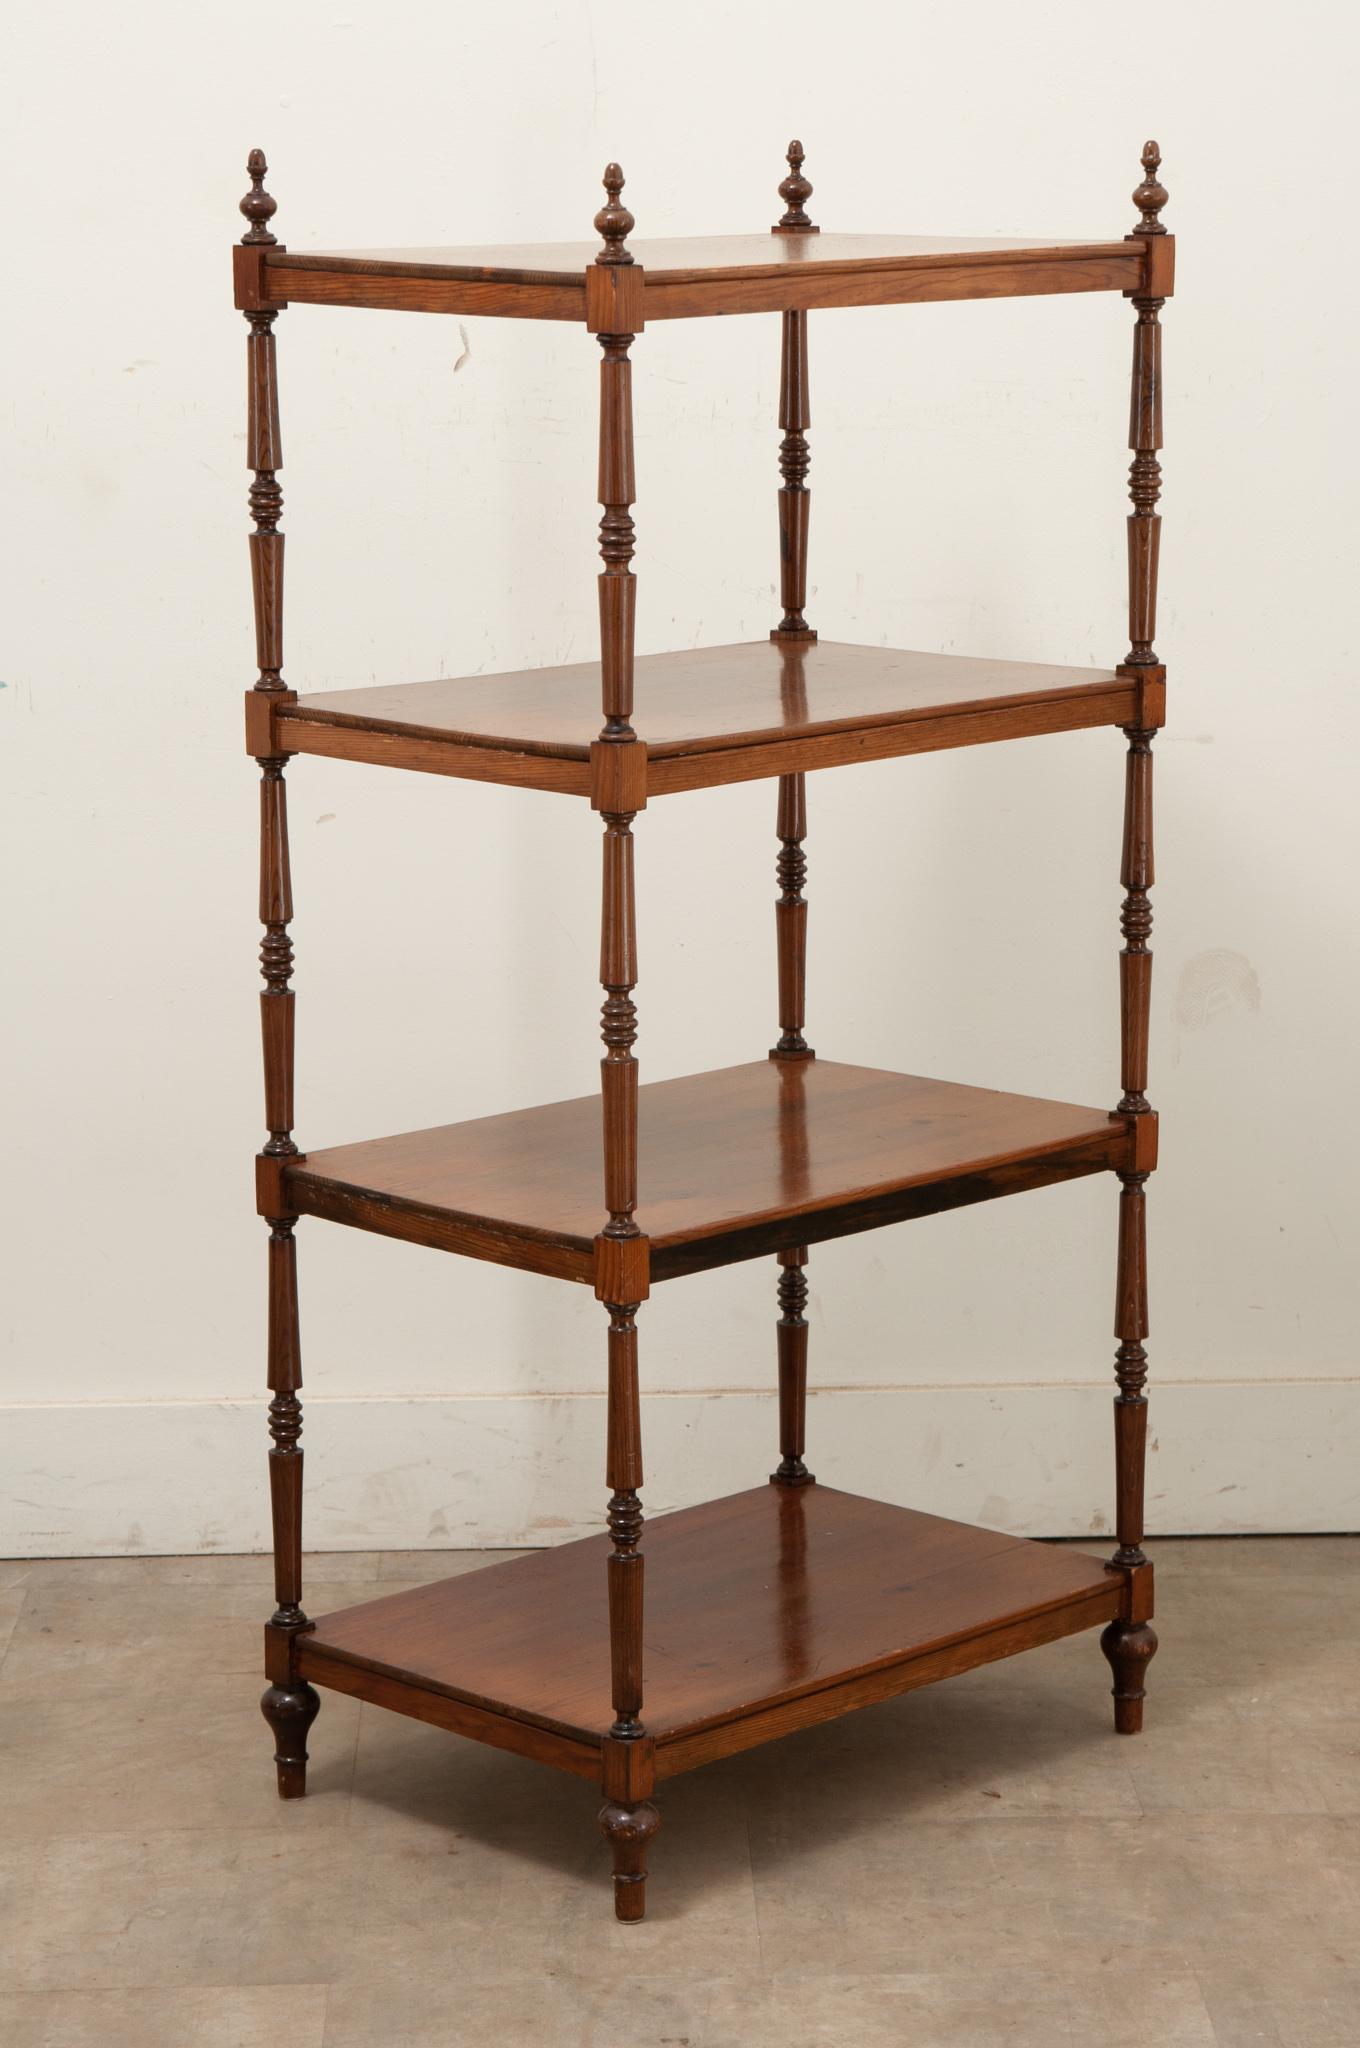 A tall etagere made of pine is the perfect storage addition to any interior. Light weight in style this shelf is topped with finials over four well spaced shelves all held together with decorative turned pine legs. Be sure to take a look at the